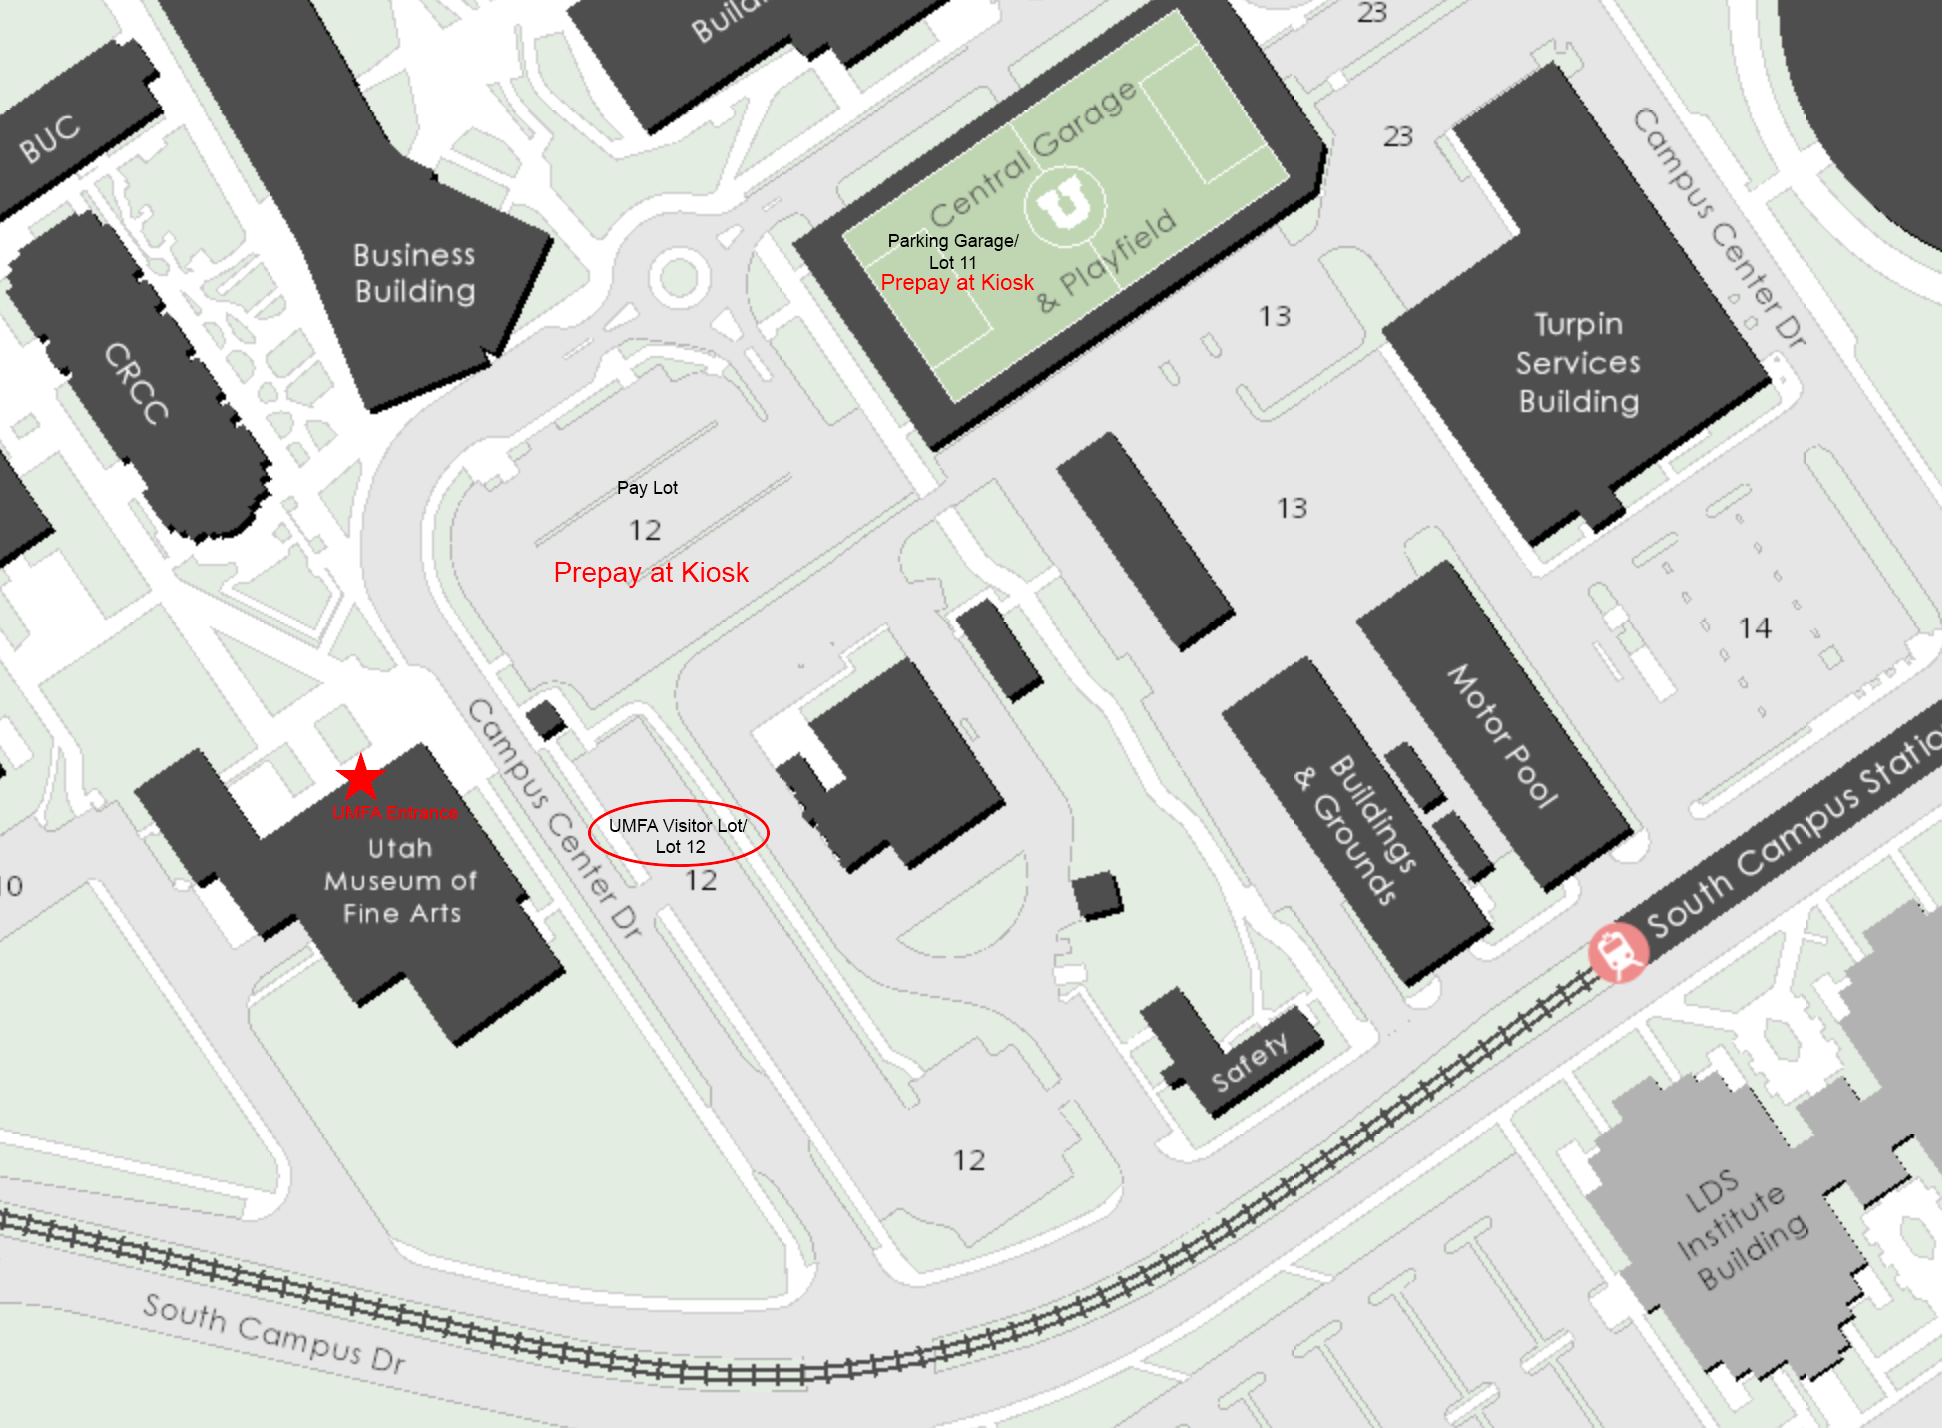 A simple map of available parking around the UMFA building.